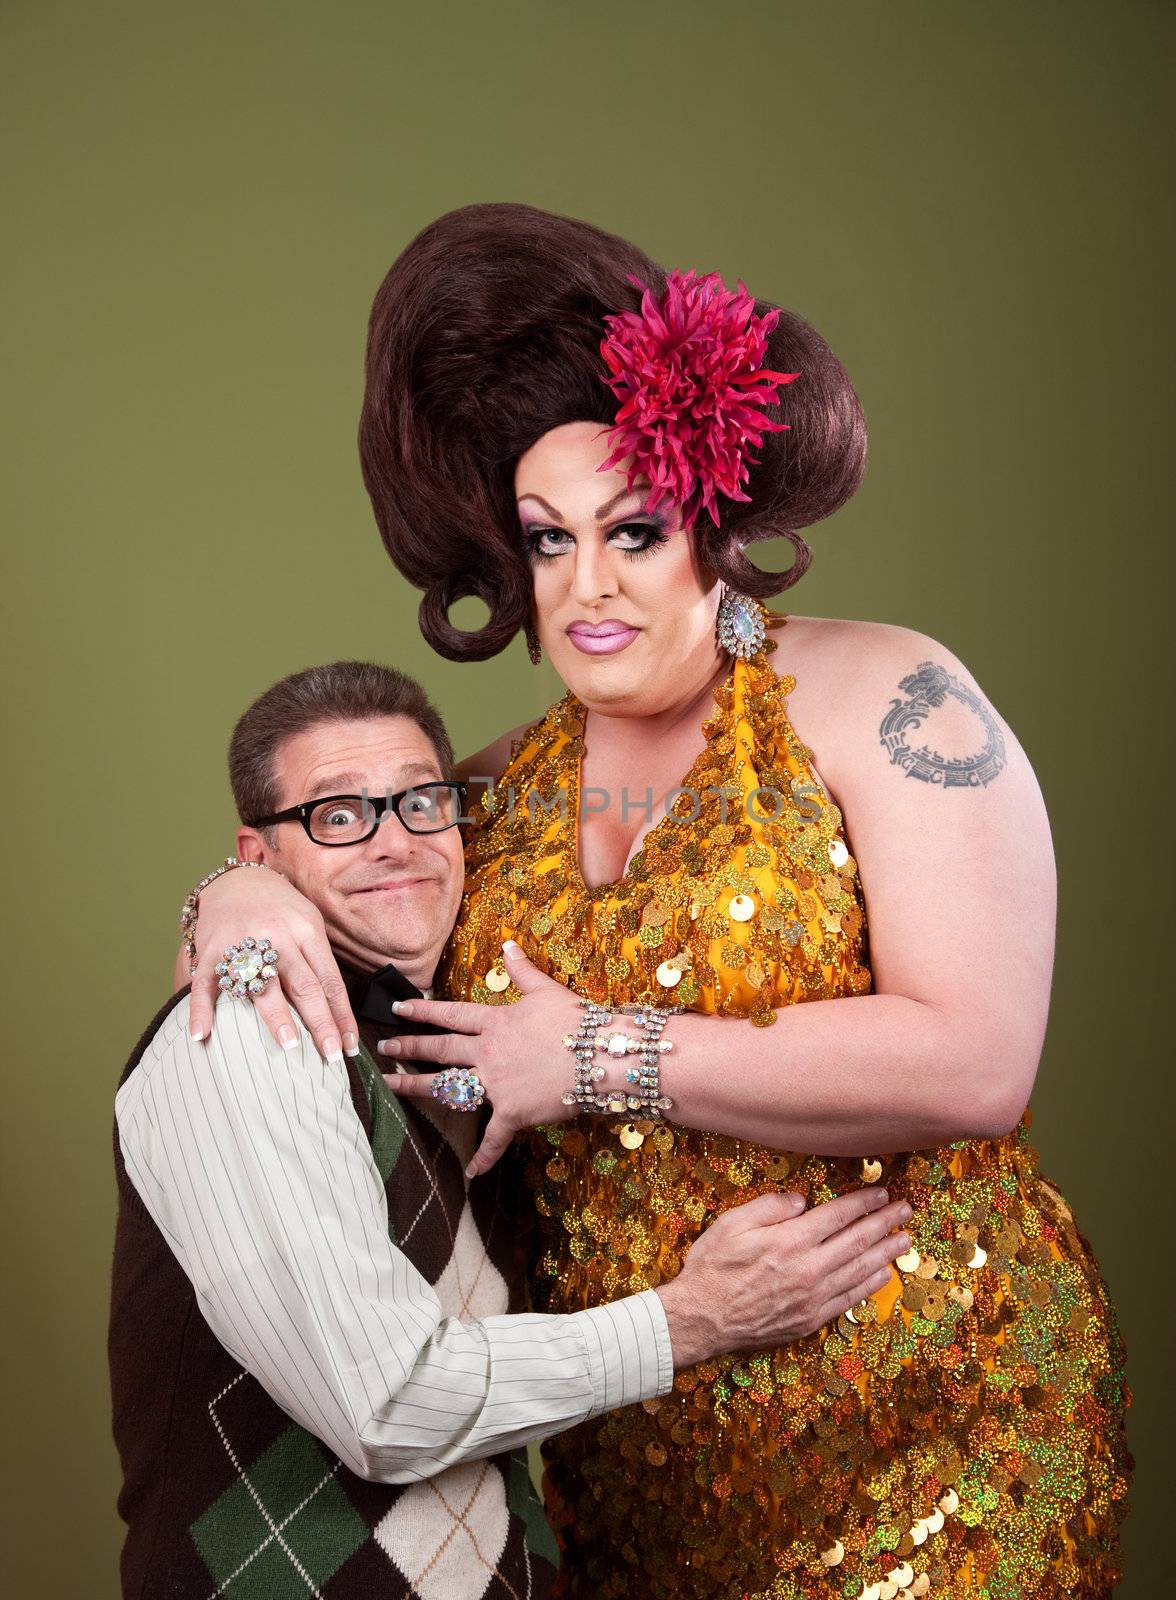 Nerd hugs a large large drag queen over a green background